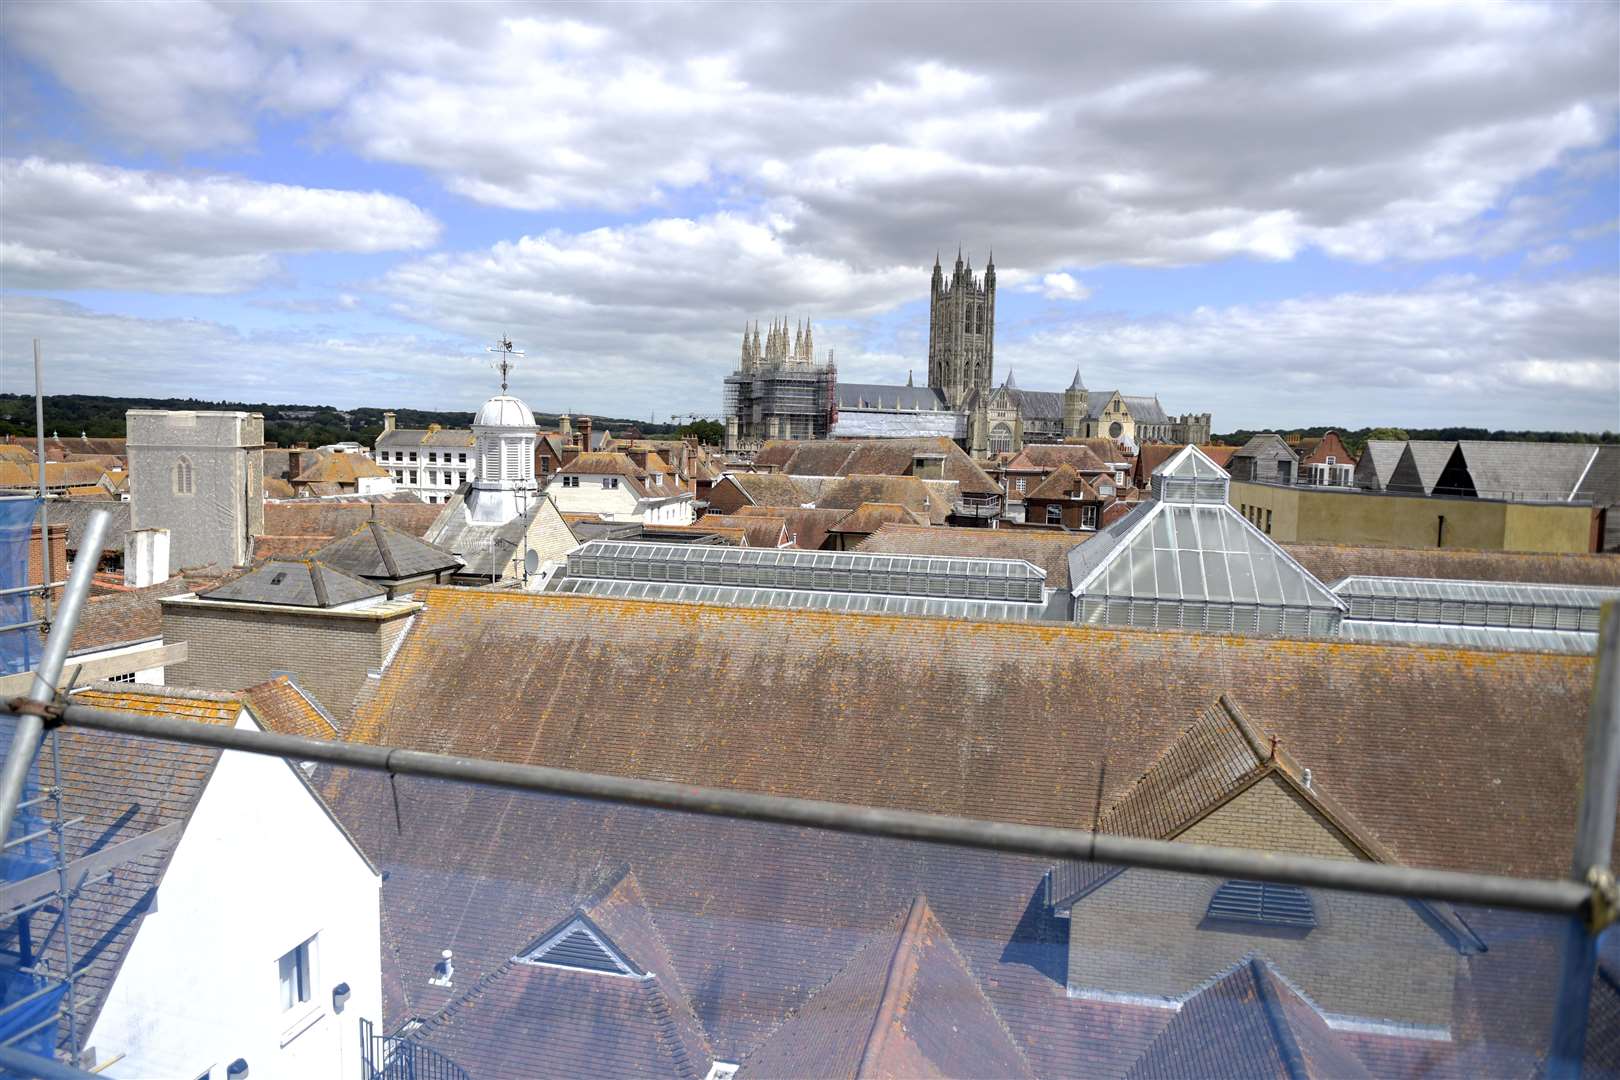 Diners will soon be able to take in the view across to the Cathedral